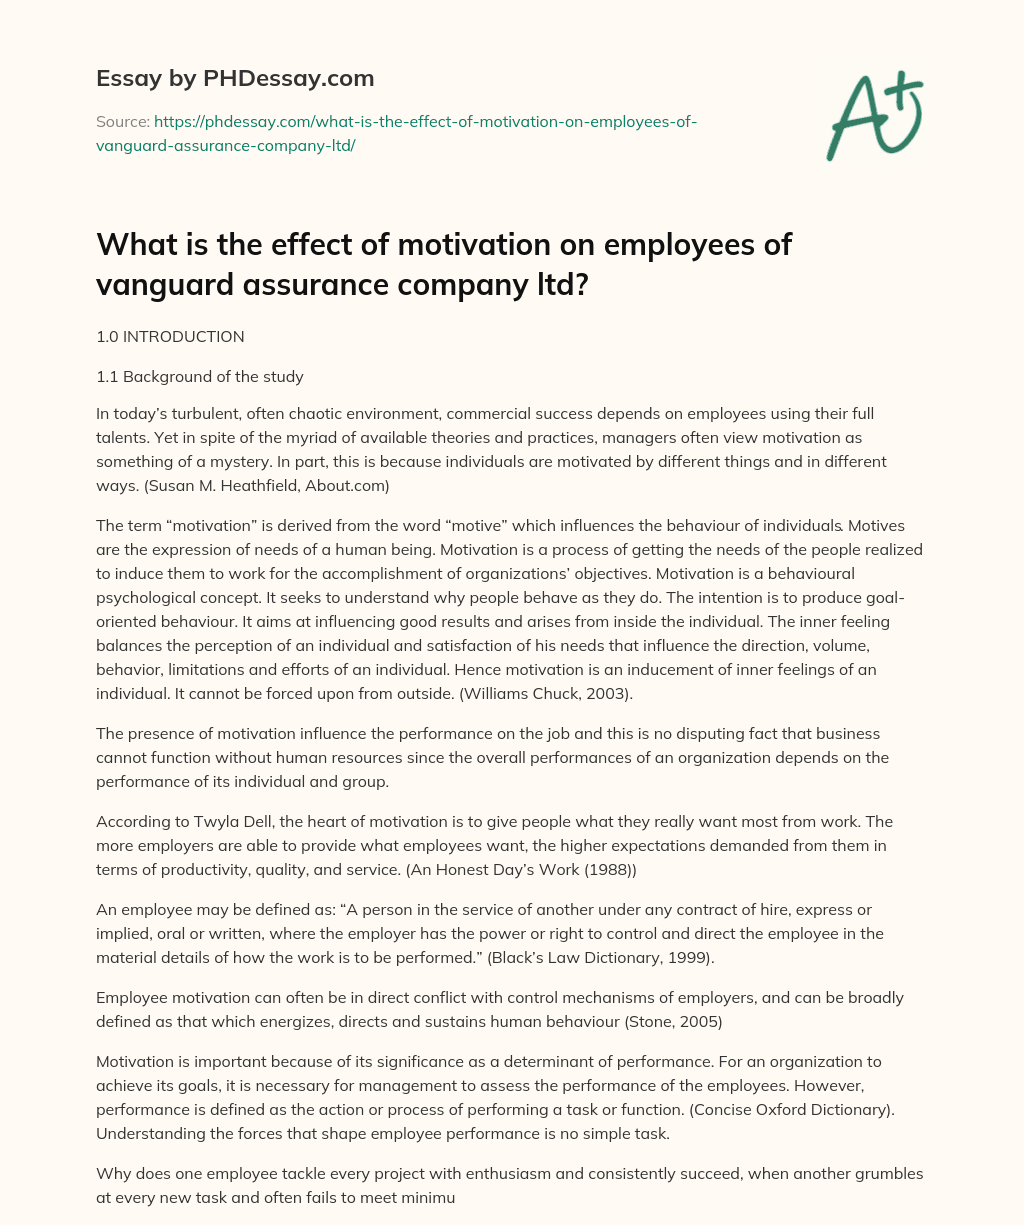 What is the effect of motivation on employees of vanguard assurance company ltd? essay